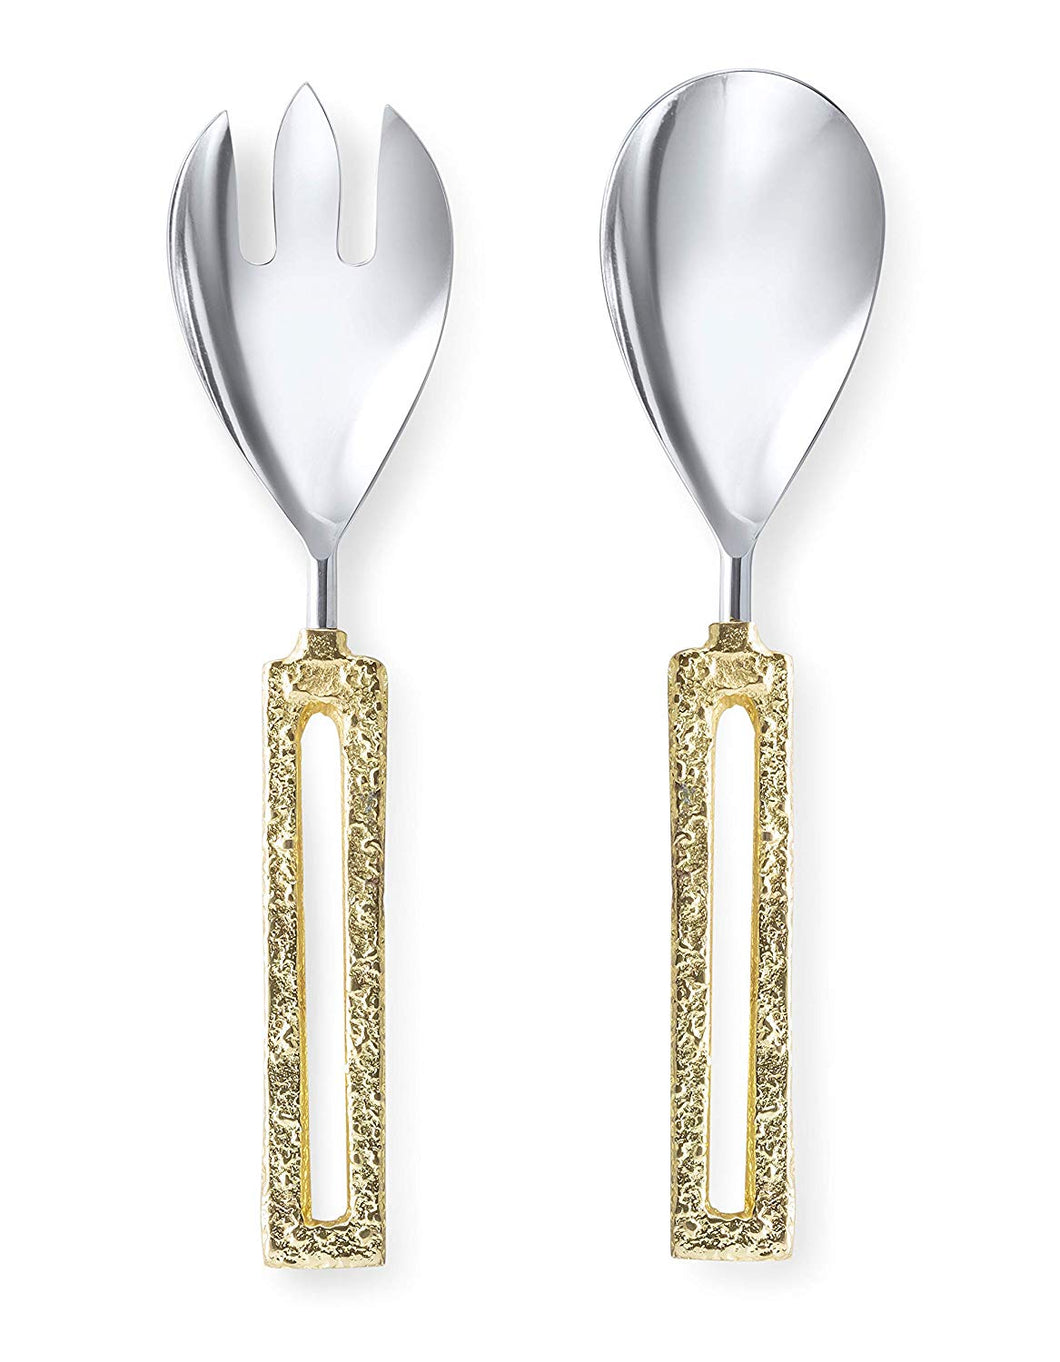 Set of Stainless Steel Salad Servers with Gold Loop Handle